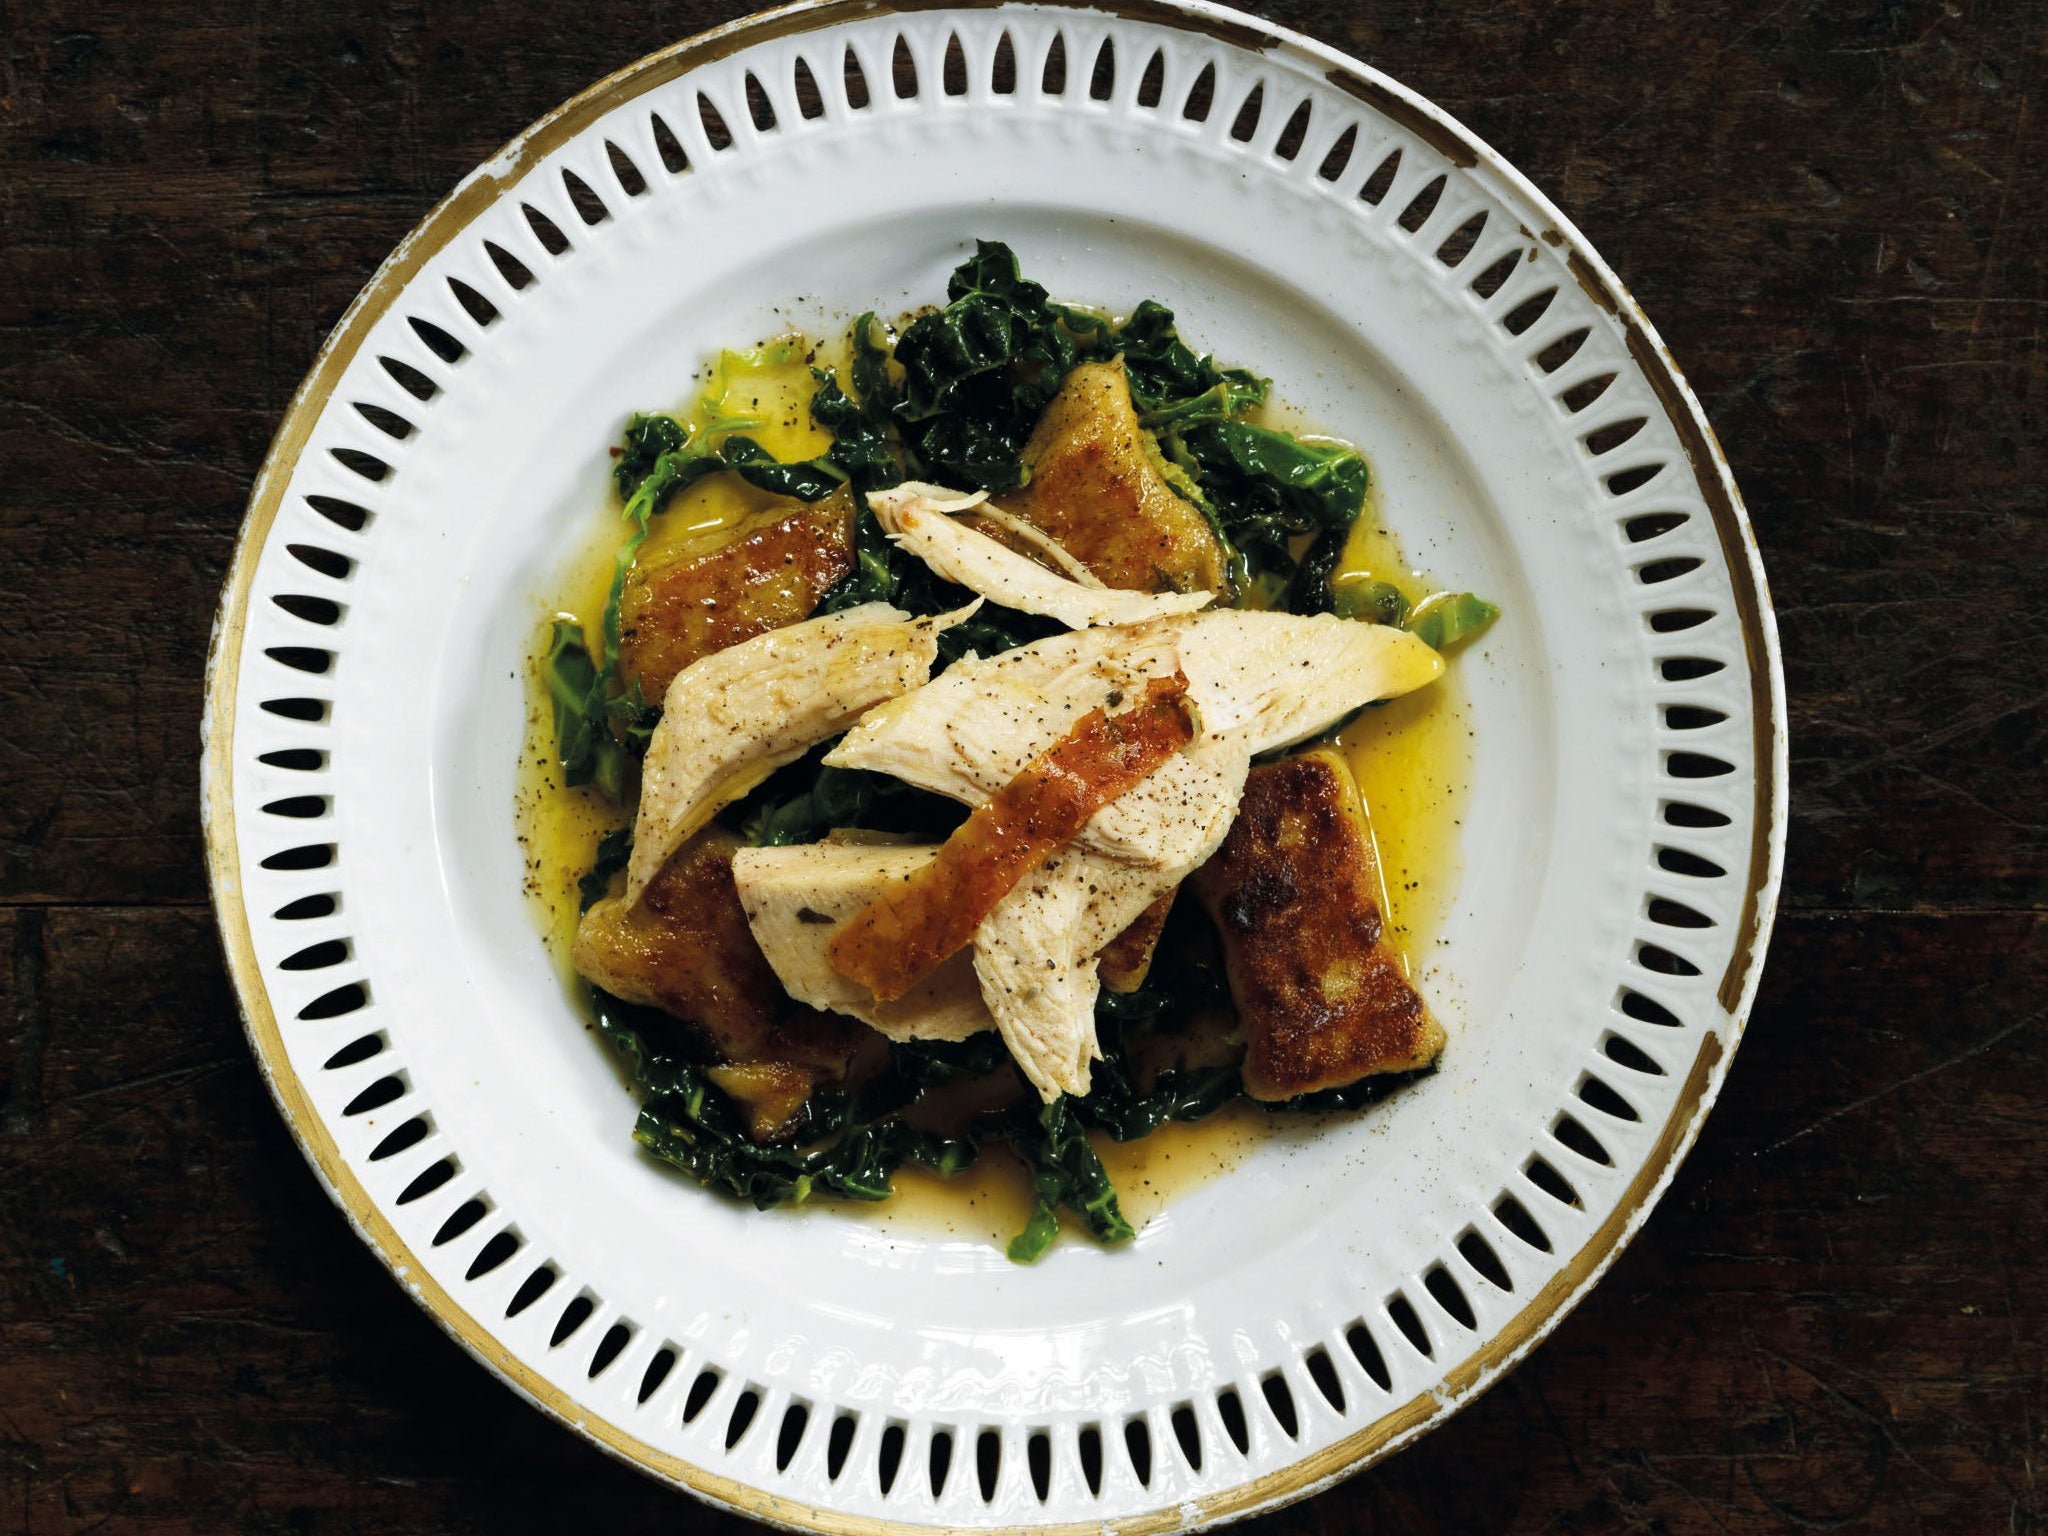 Roast chicken with truffled gnocchi and sage butter by Gizzi Erskine